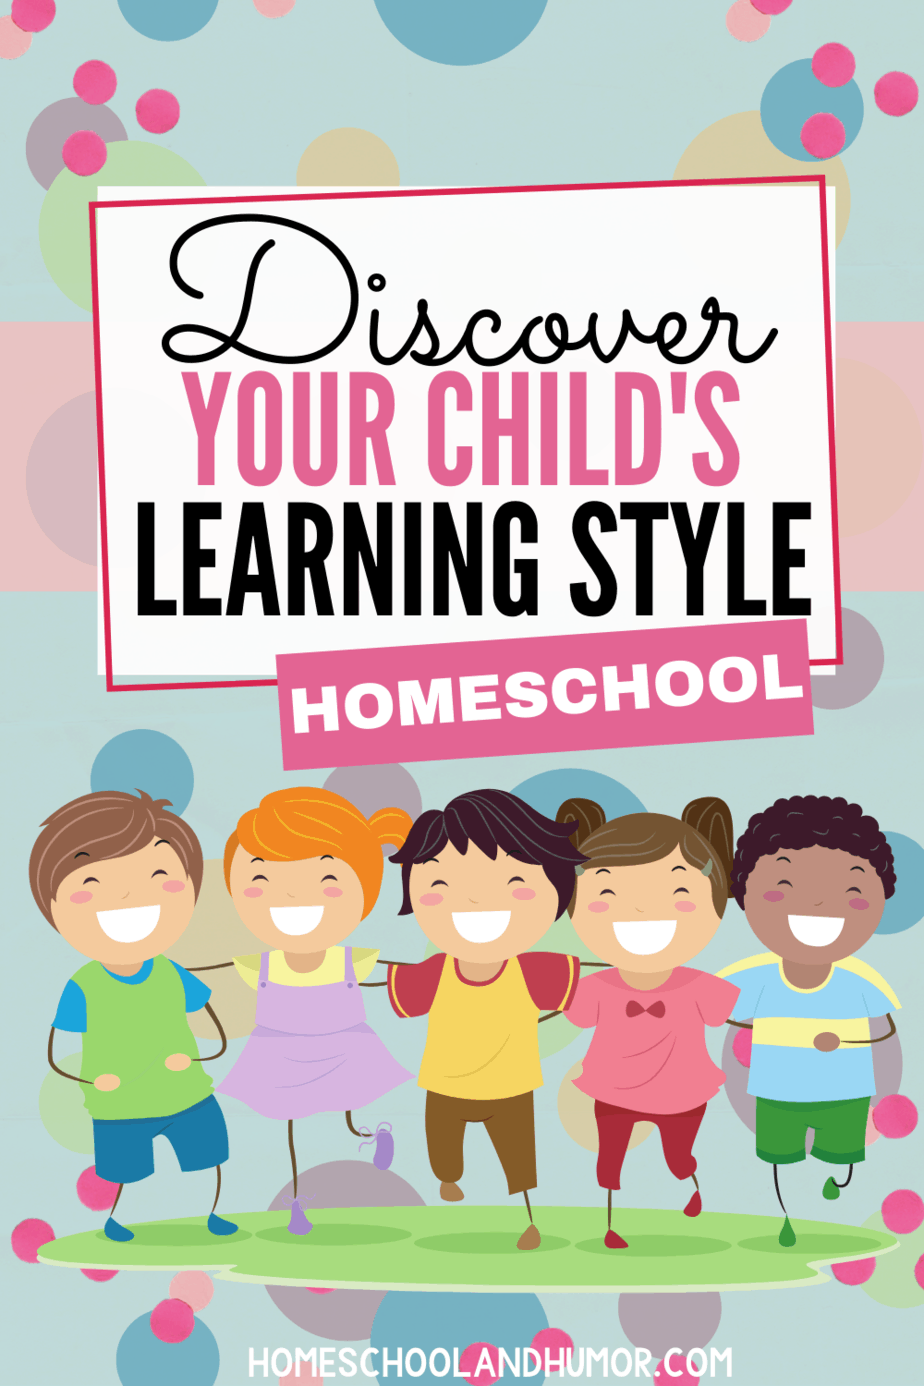 know the 3 Children Learning Styles before getting homeschool curriculum